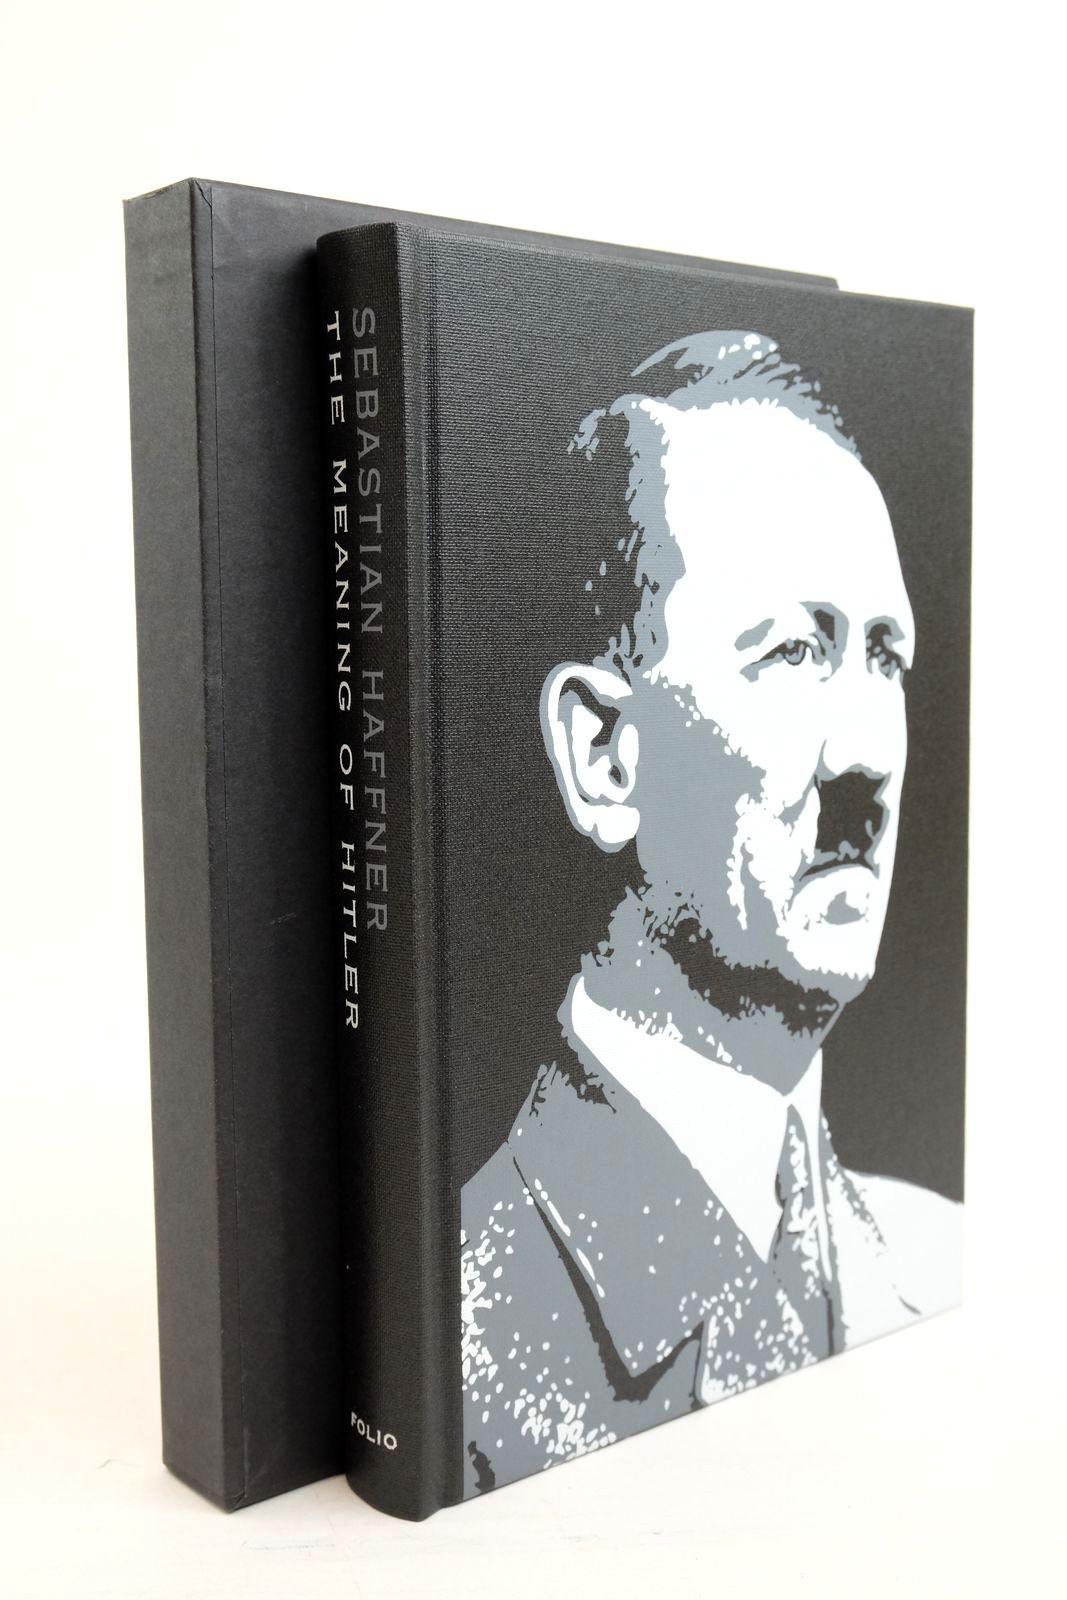 Photo of THE MEANING OF HITLER written by Haffner, Sebastian published by Folio Society (STOCK CODE: 1321069)  for sale by Stella & Rose's Books